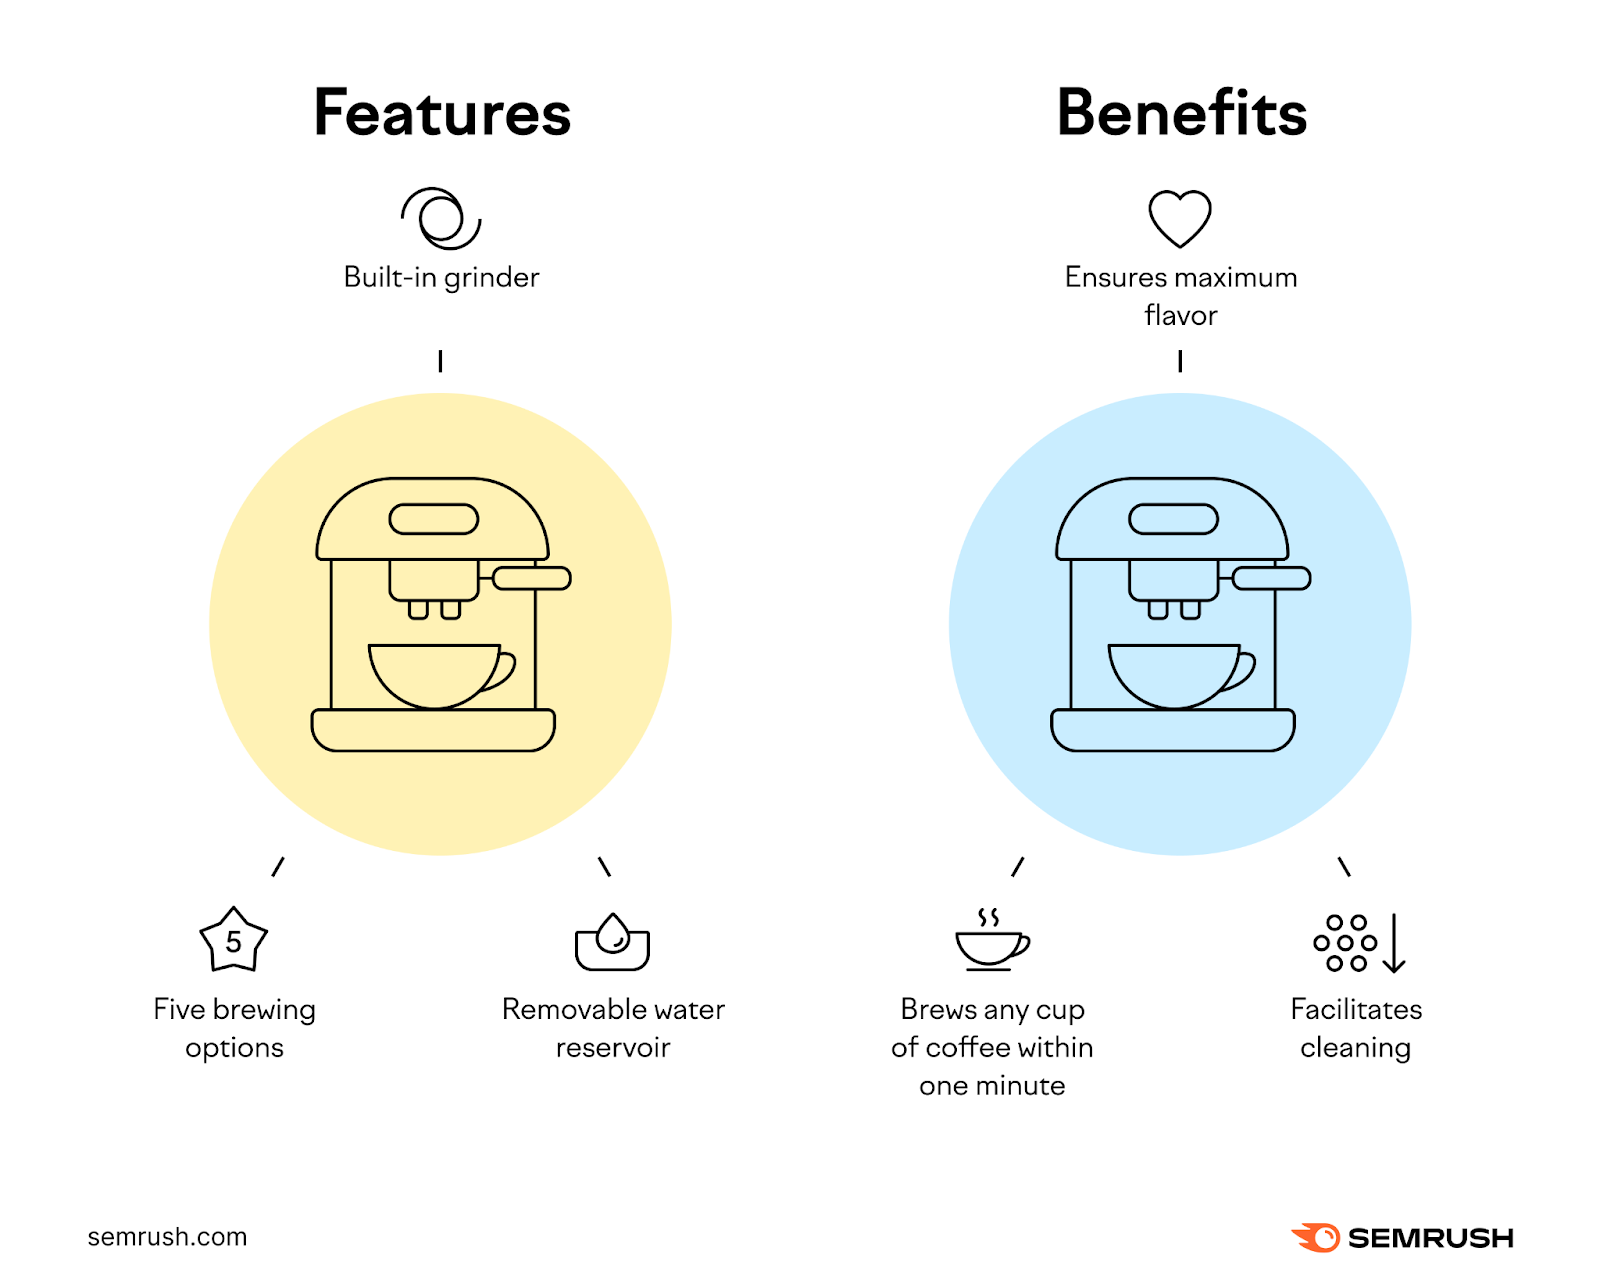 An infographic showing the difference between features and benefits of a coffee machine